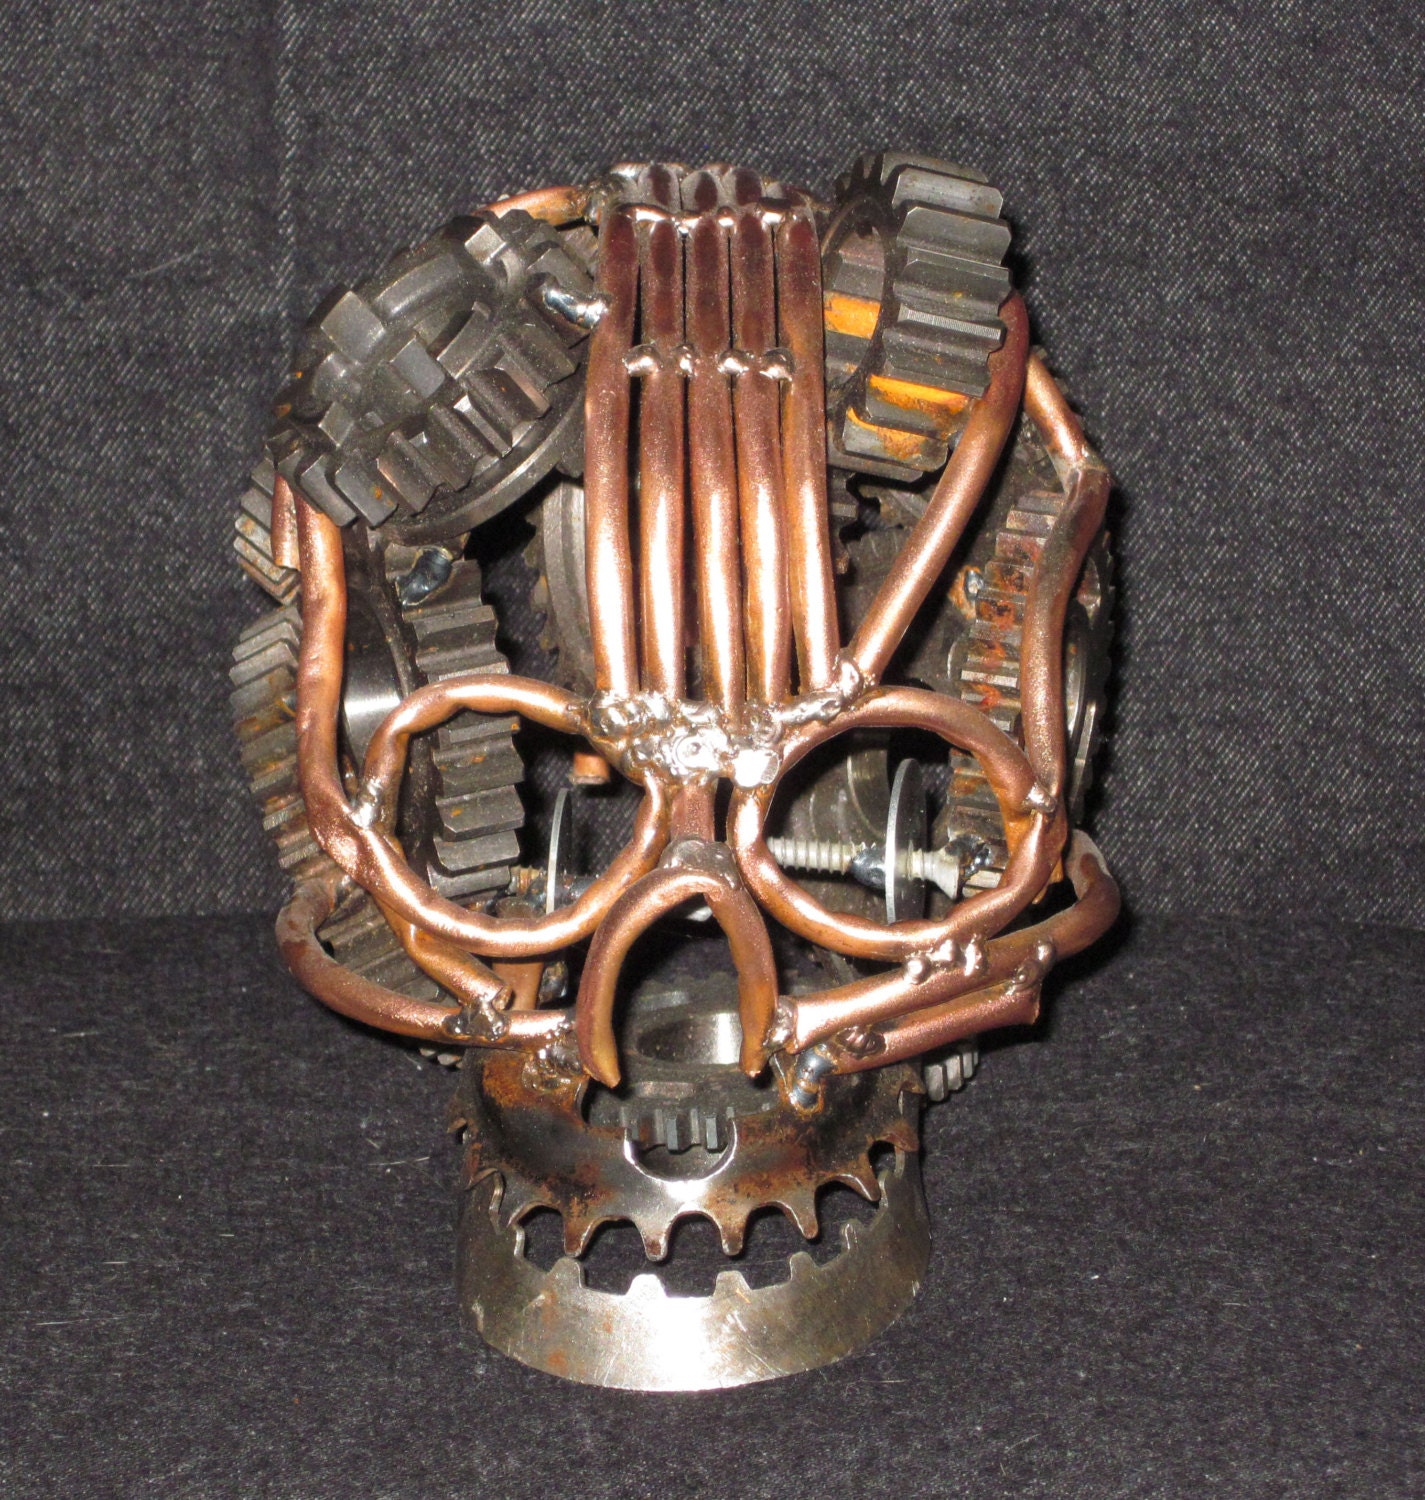 Copper and gears make this Skull - Beckspecialties